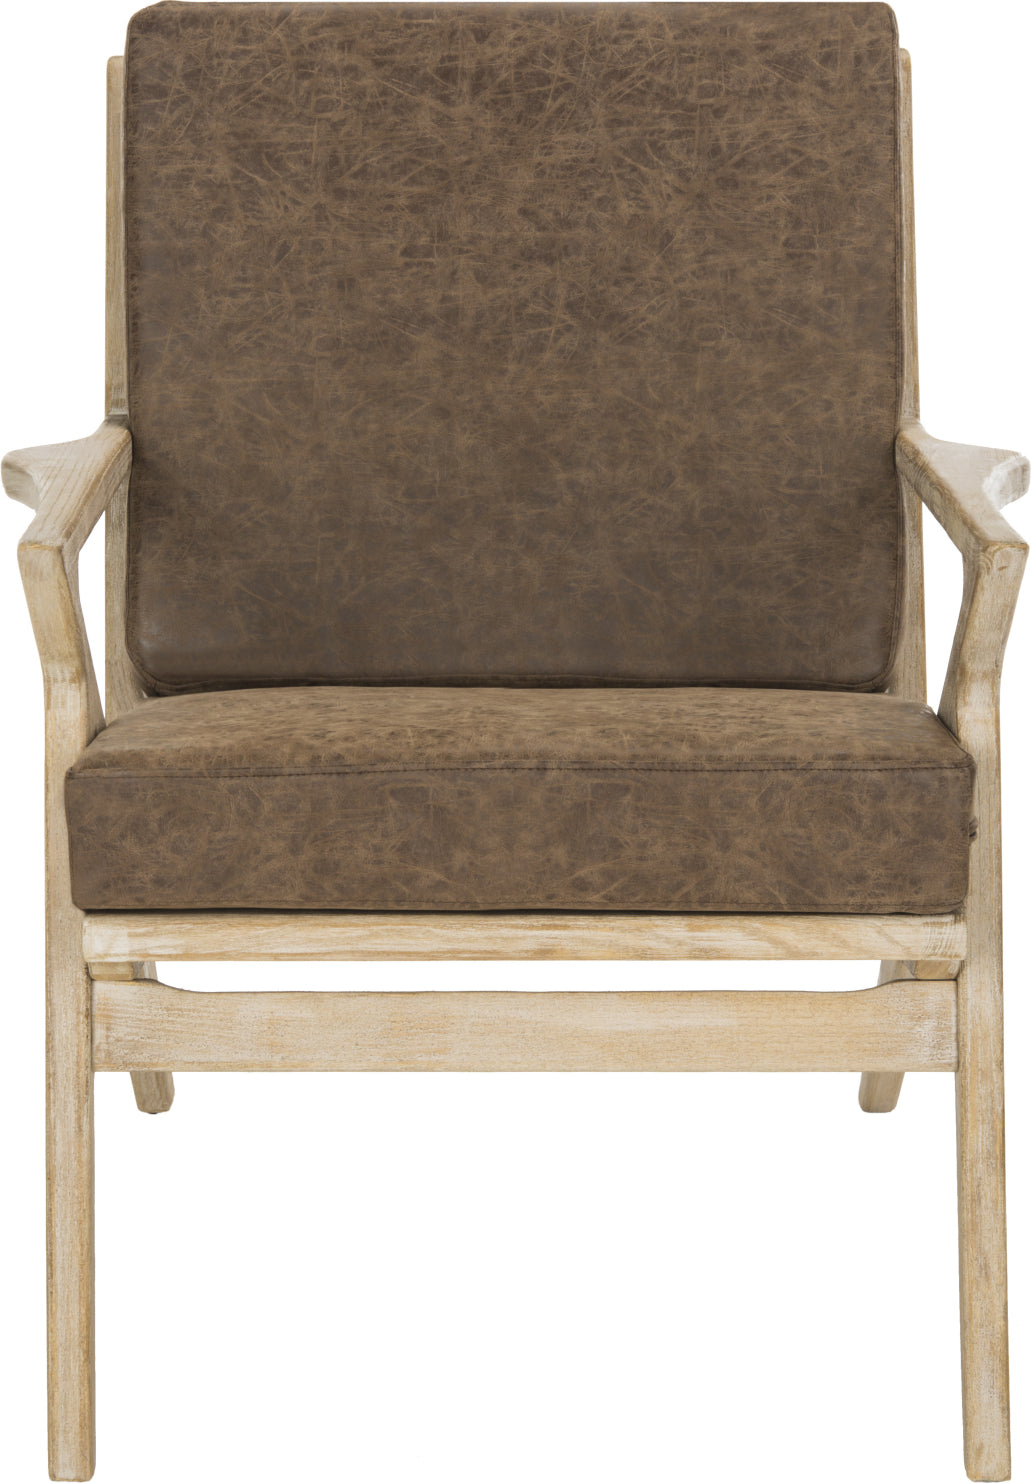 Safavieh Varys Accent Chair Light Brown and Natural Furniture main image